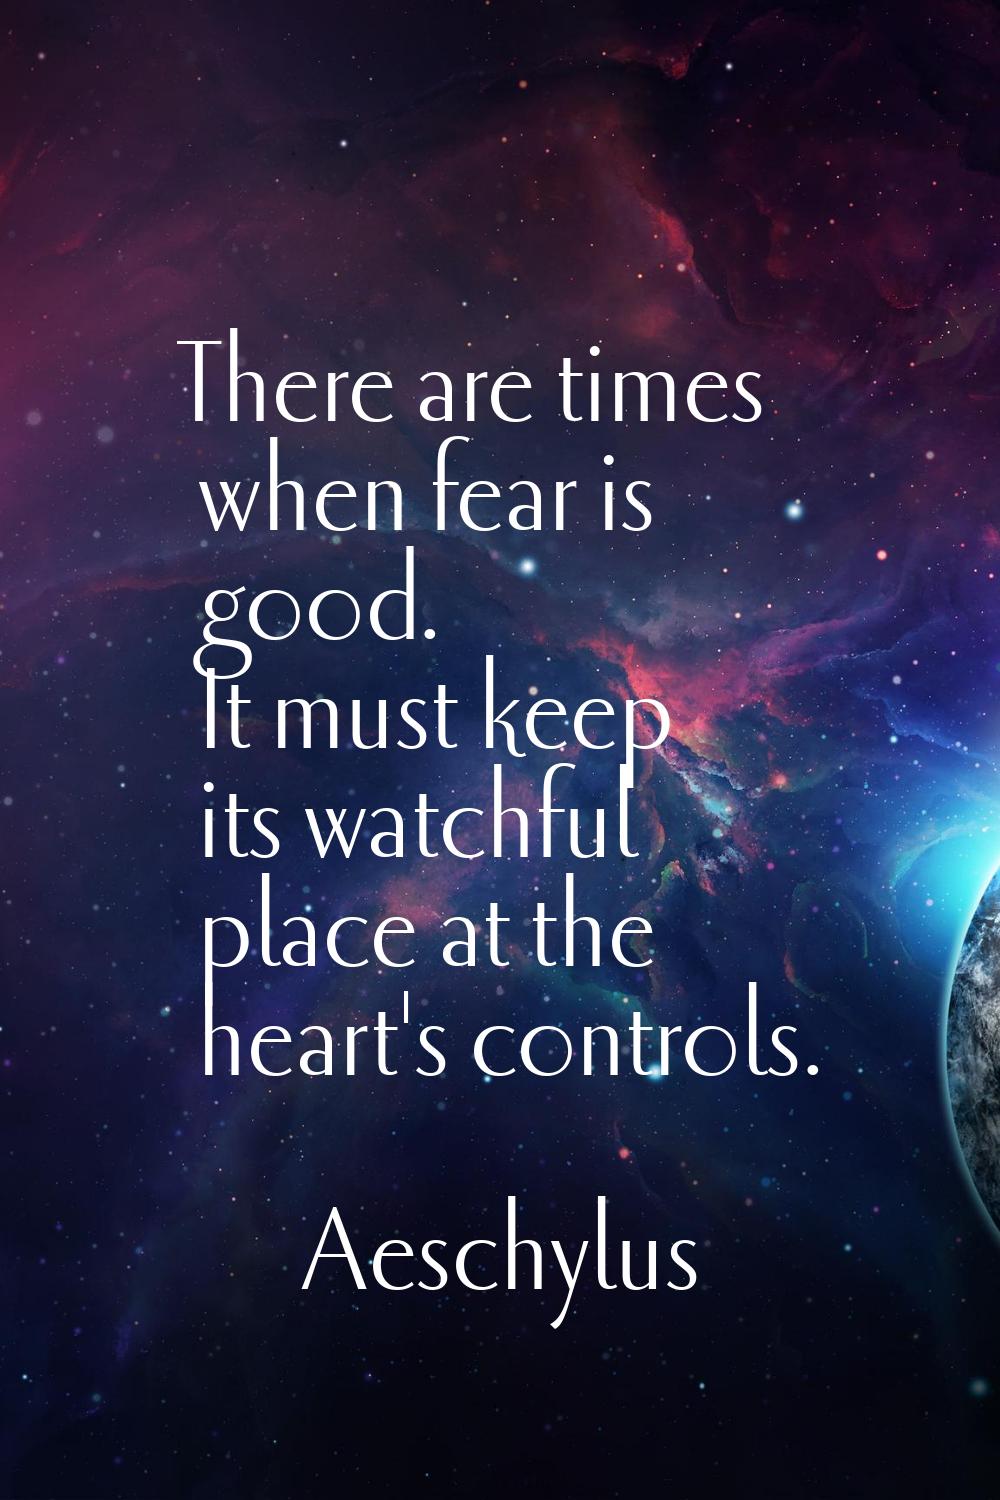 There are times when fear is good. It must keep its watchful place at the heart's controls.